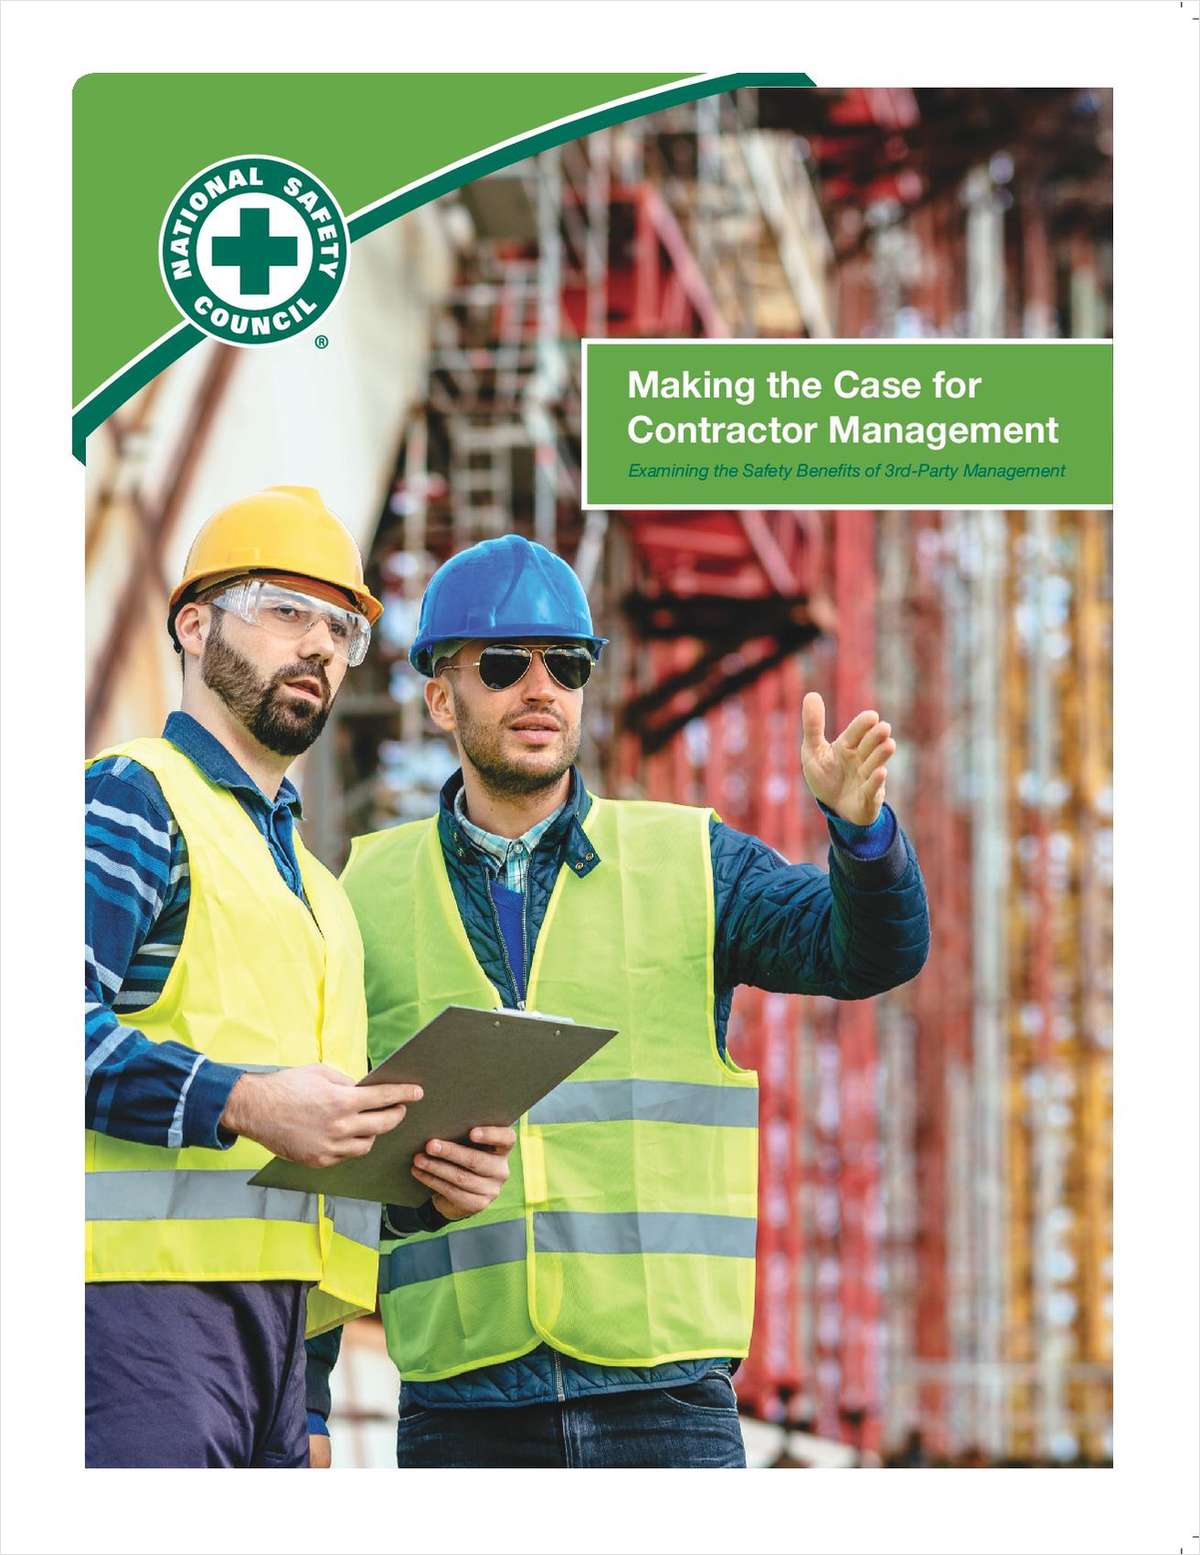 NSC Study: MAKING THE CASE FOR CONTRACTOR MANAGEMENT (Full Report)